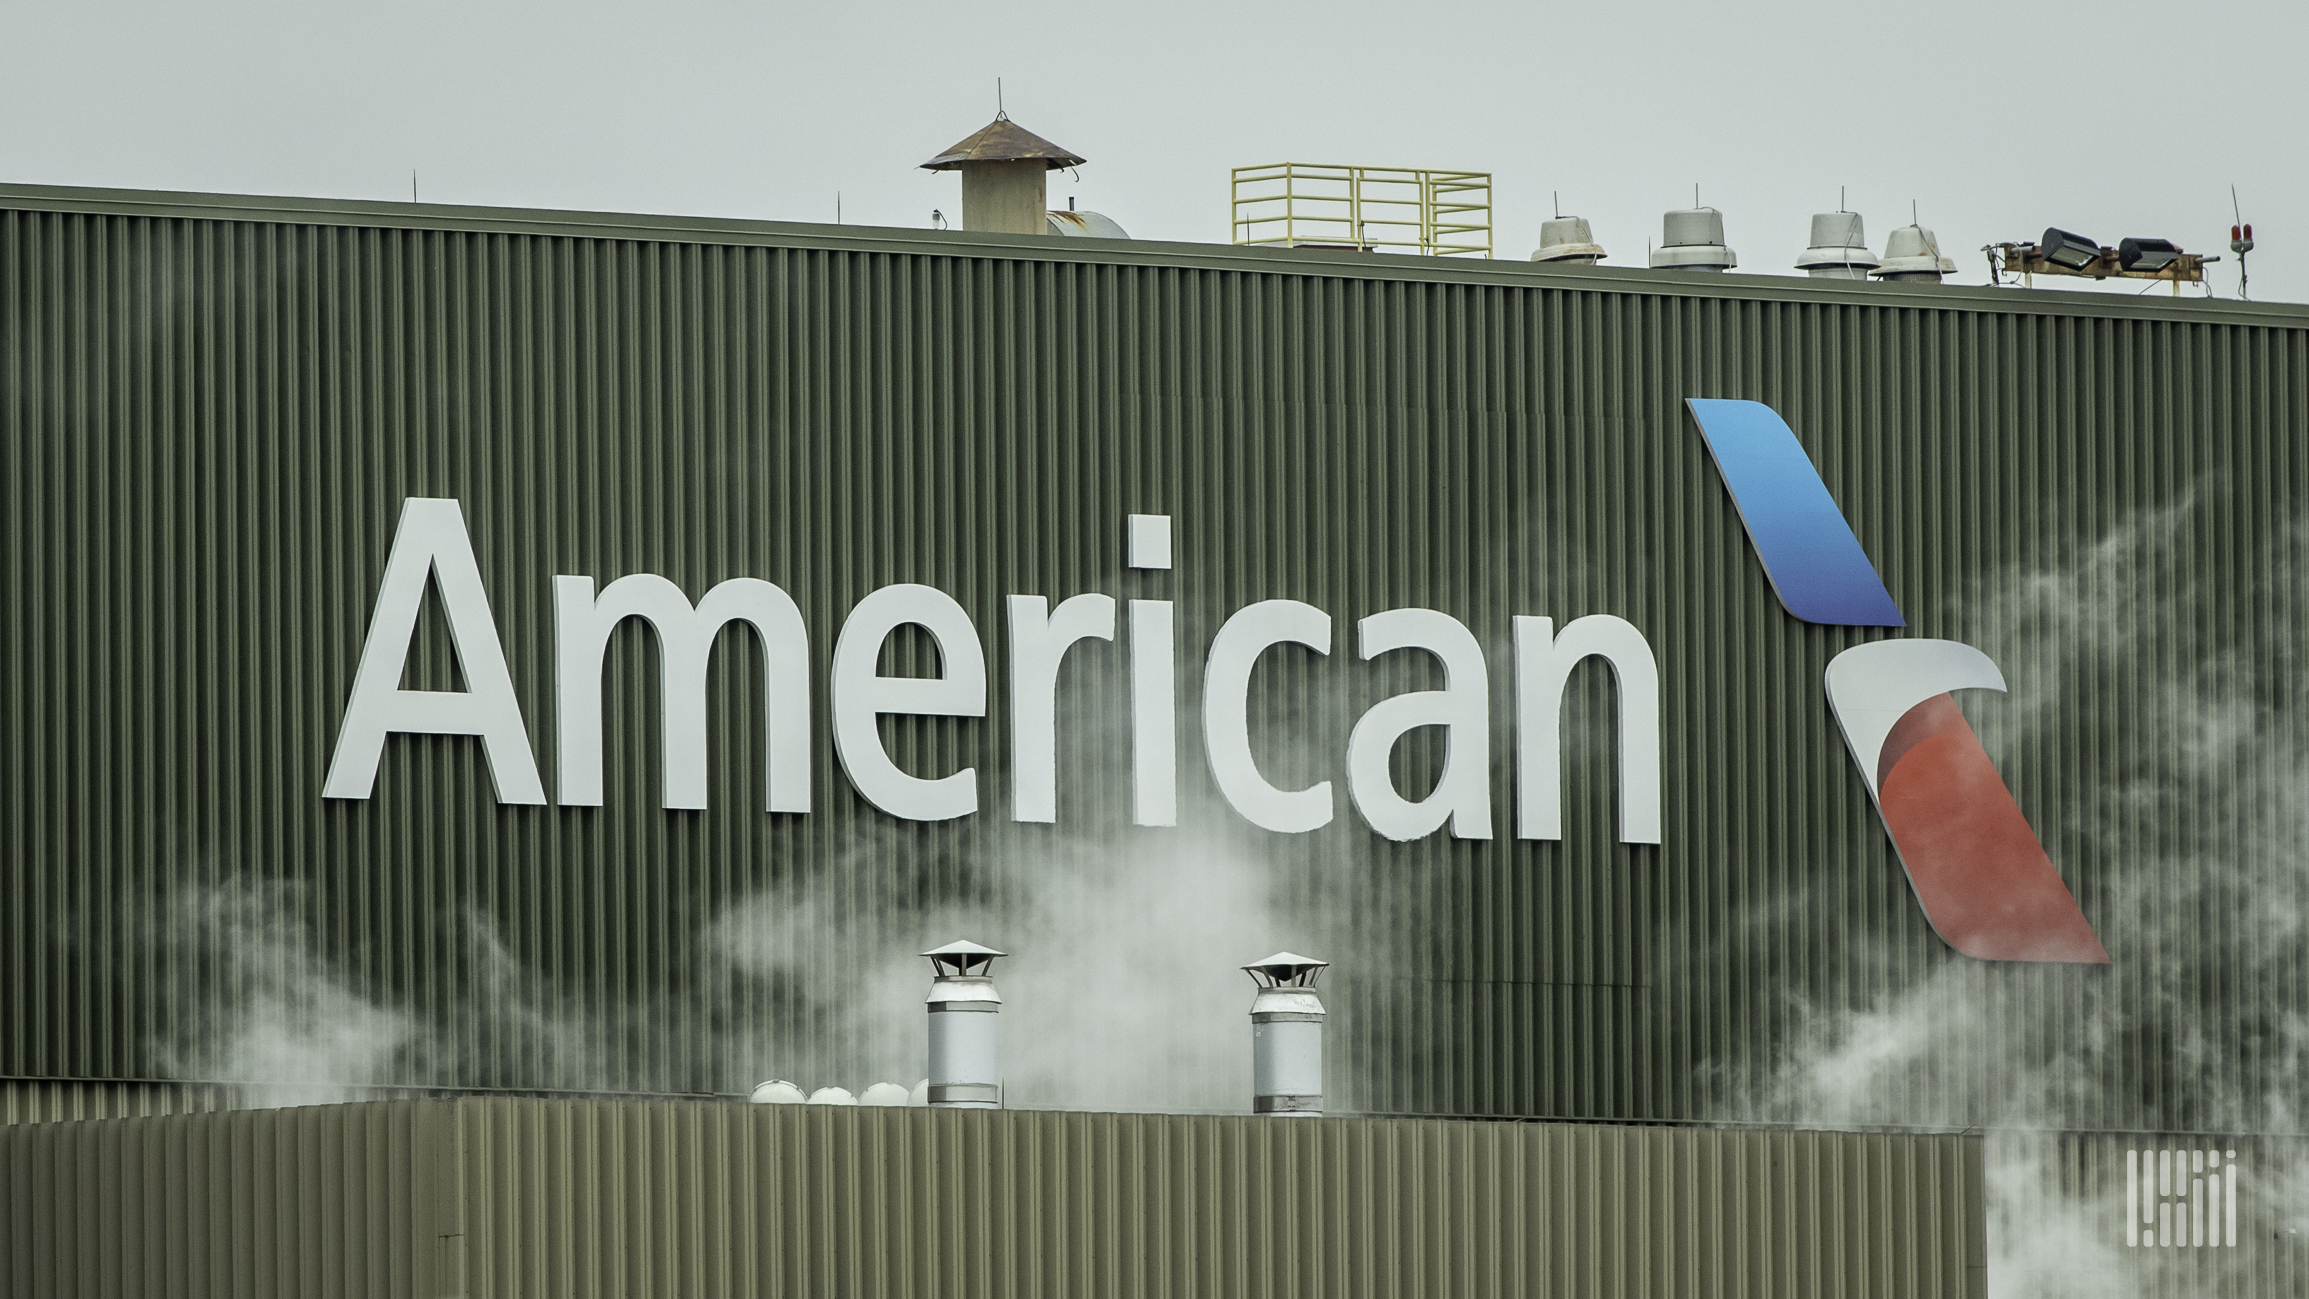 Brand signage of American Airlines on a cargo warehouse.